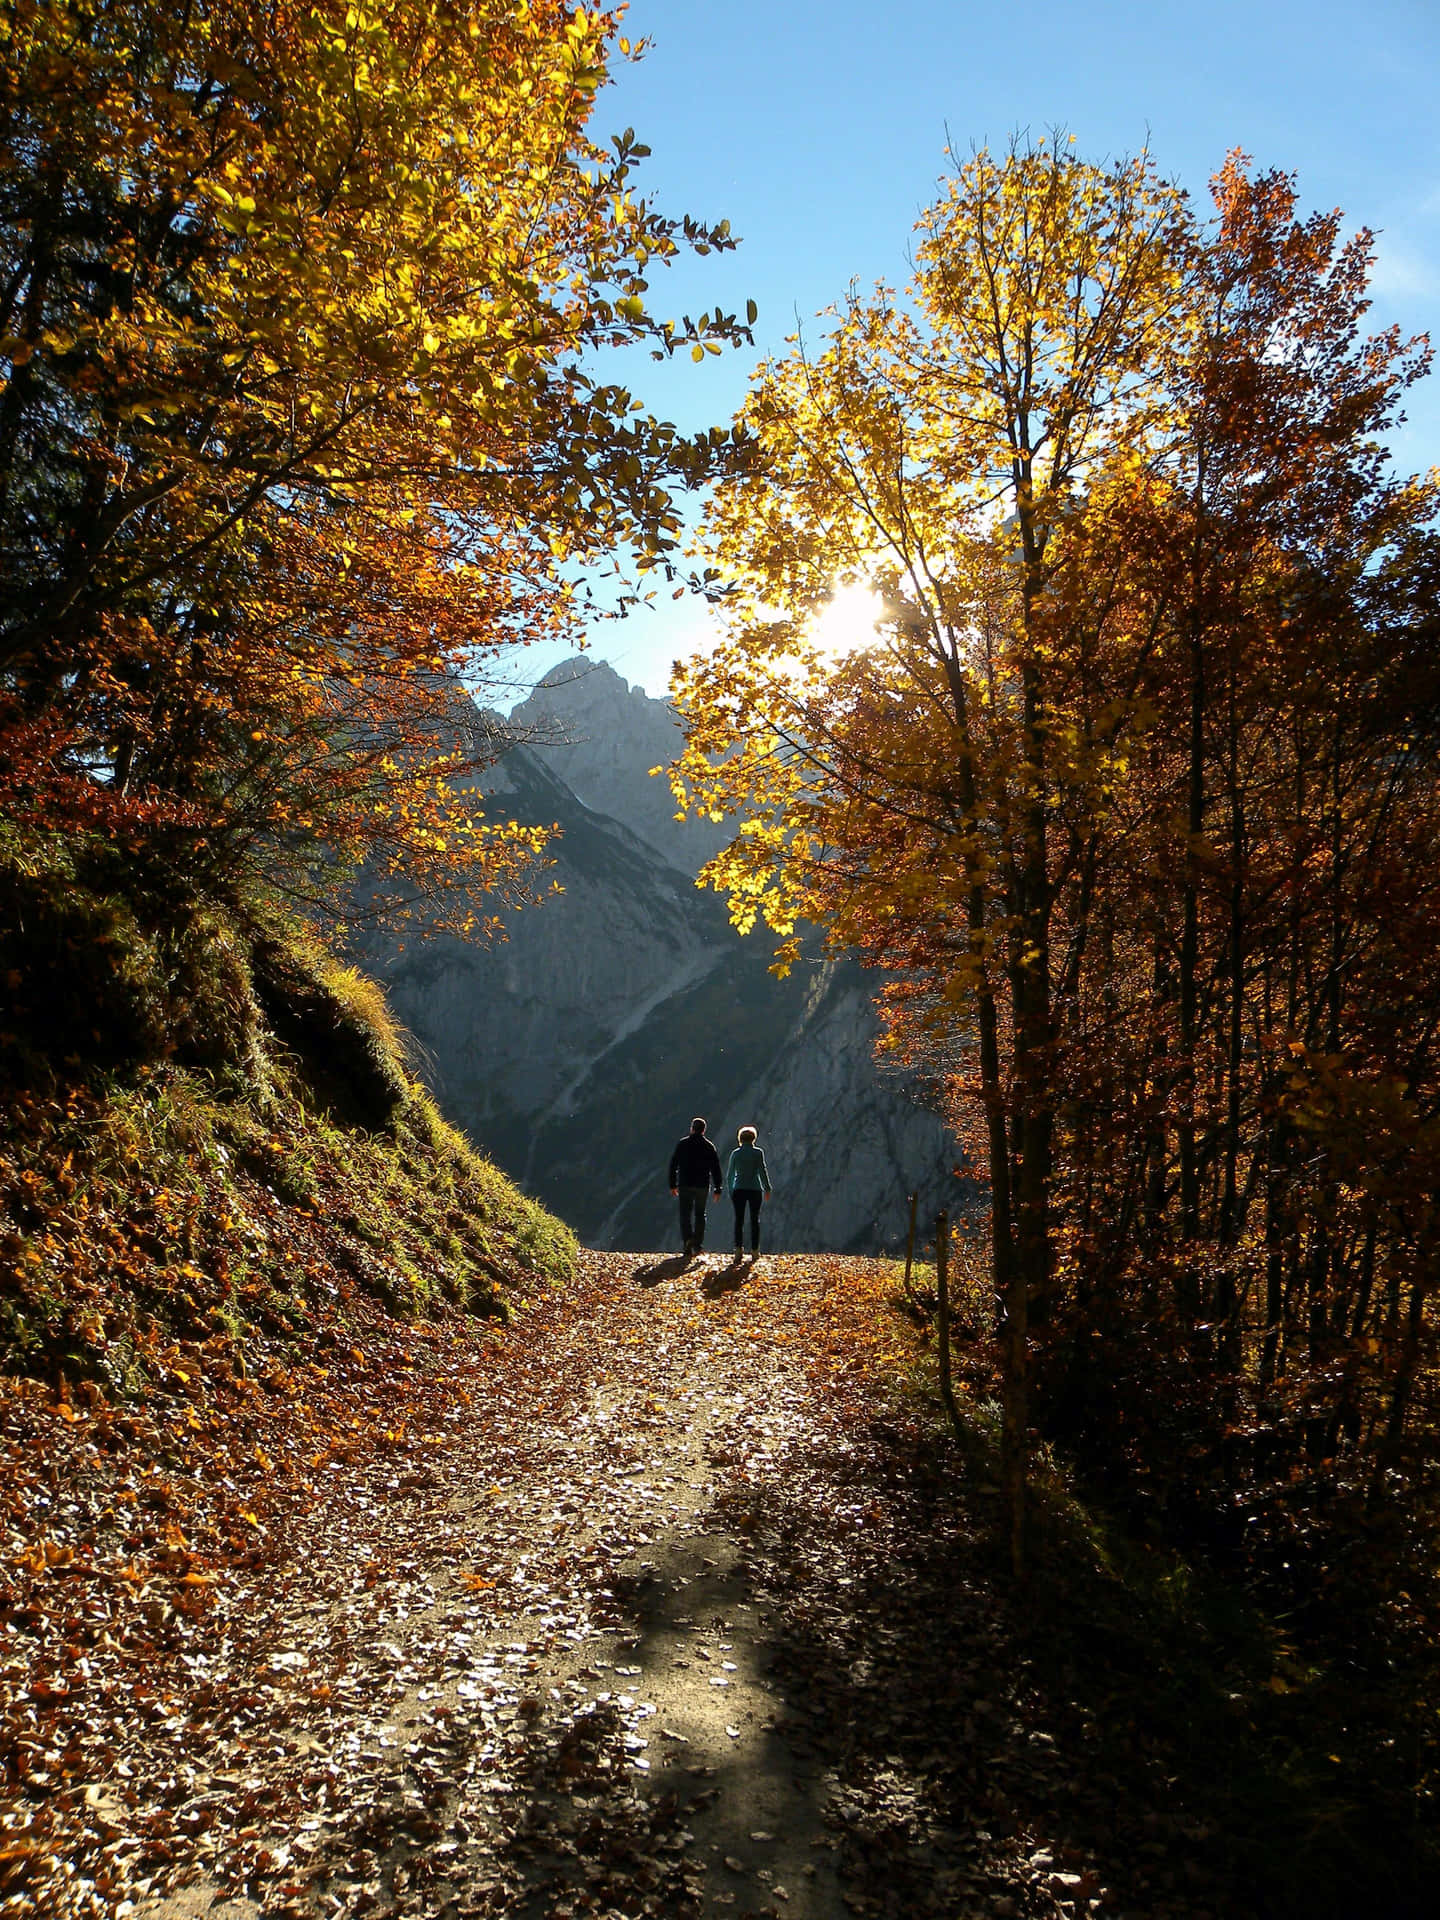 A scenic fall hike through a colorful forest trail Wallpaper